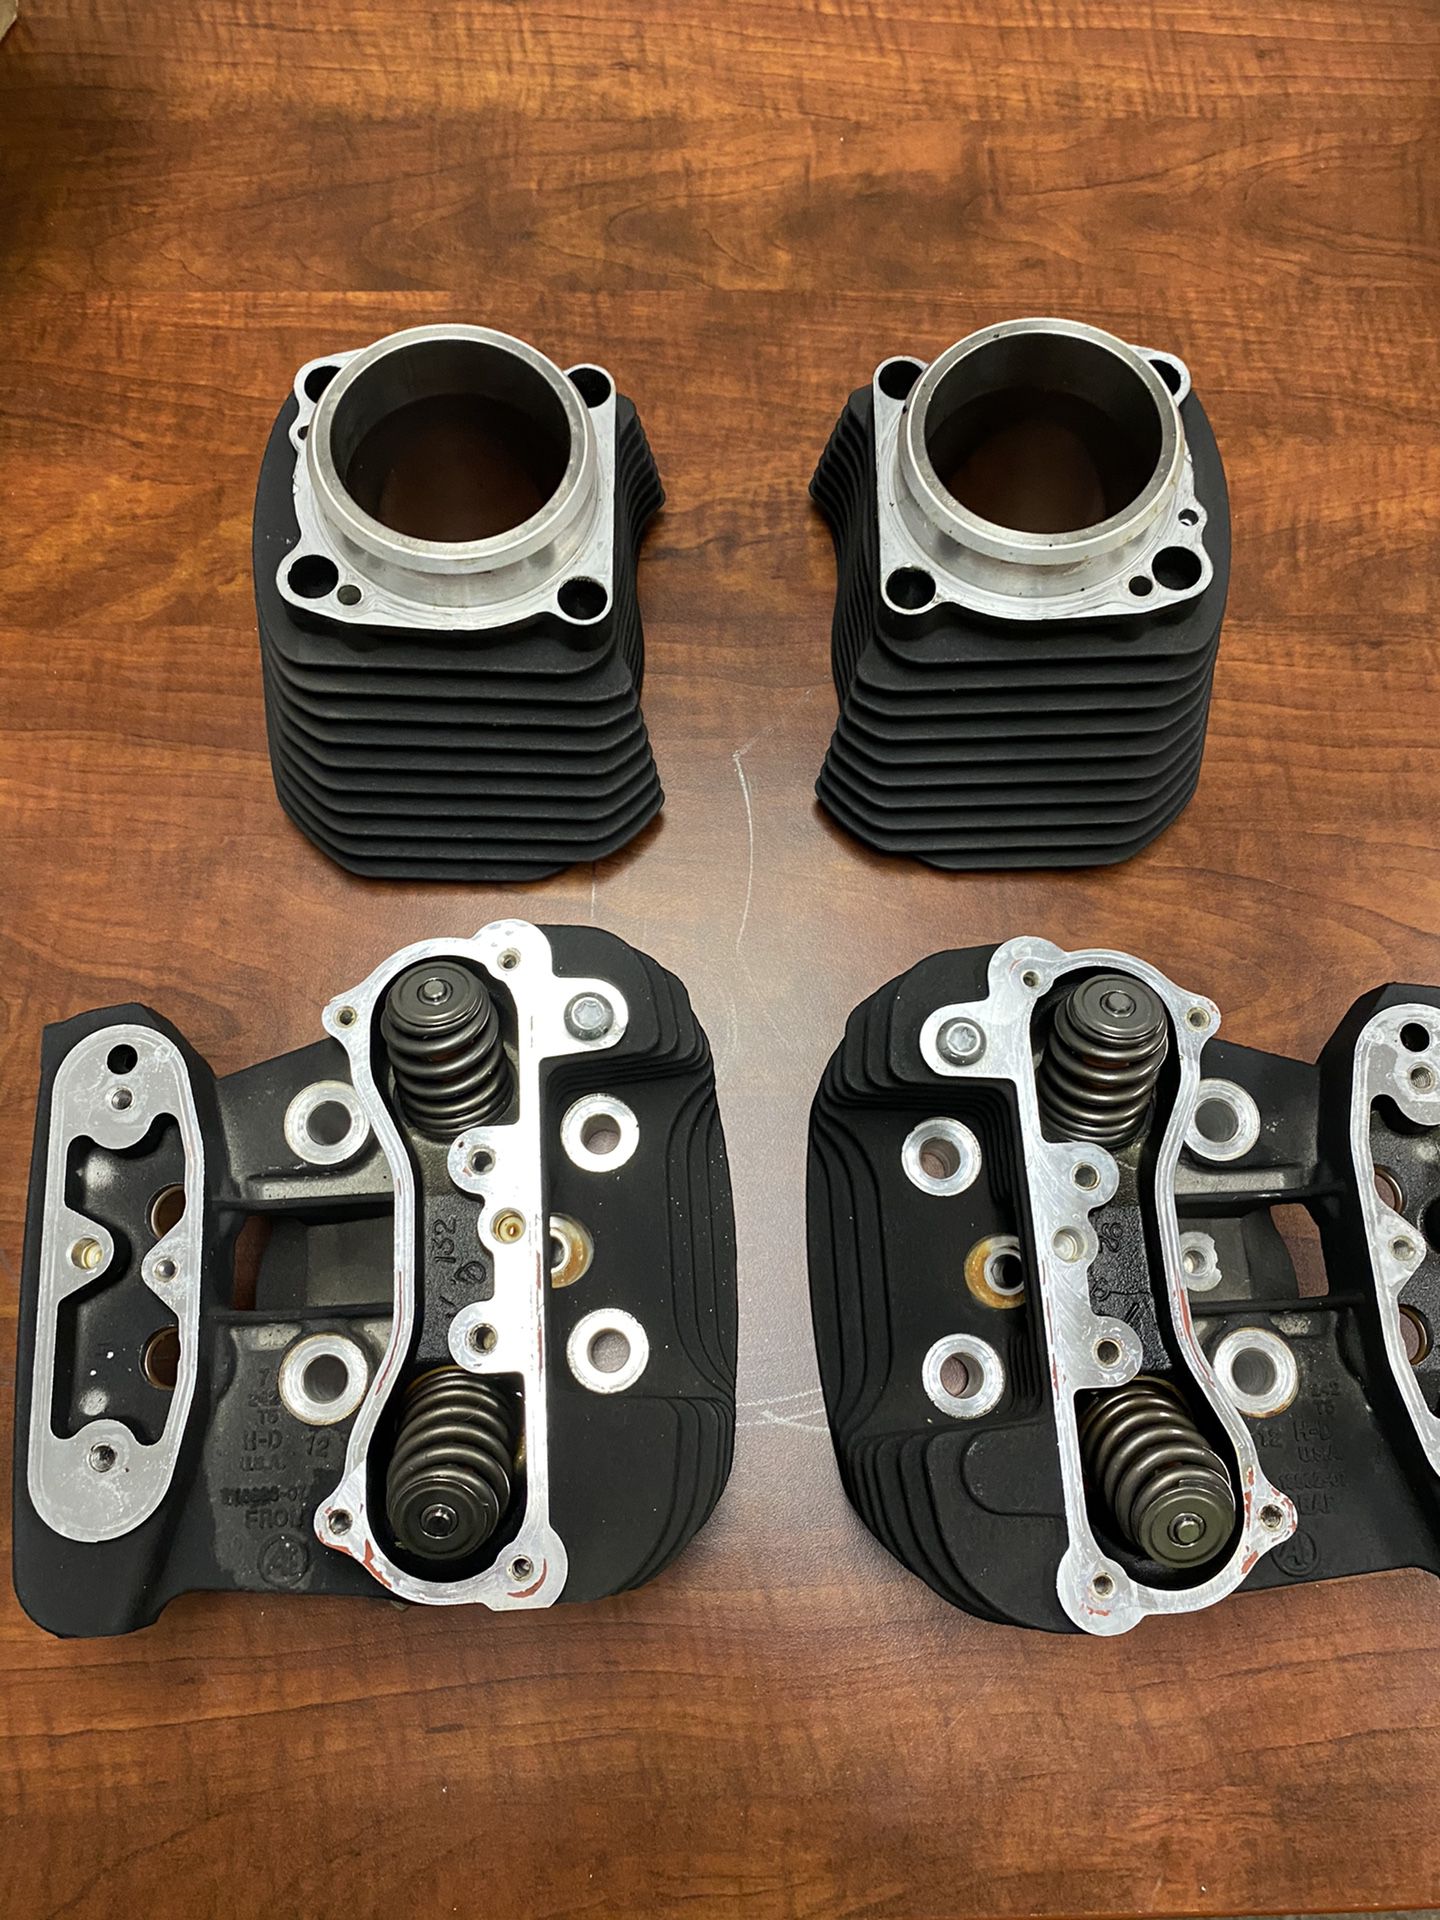 (LOOKING FOR TRDE ONLY) 07-17 Harley Davidson 883 Sportster Top End Heads And Cylinders